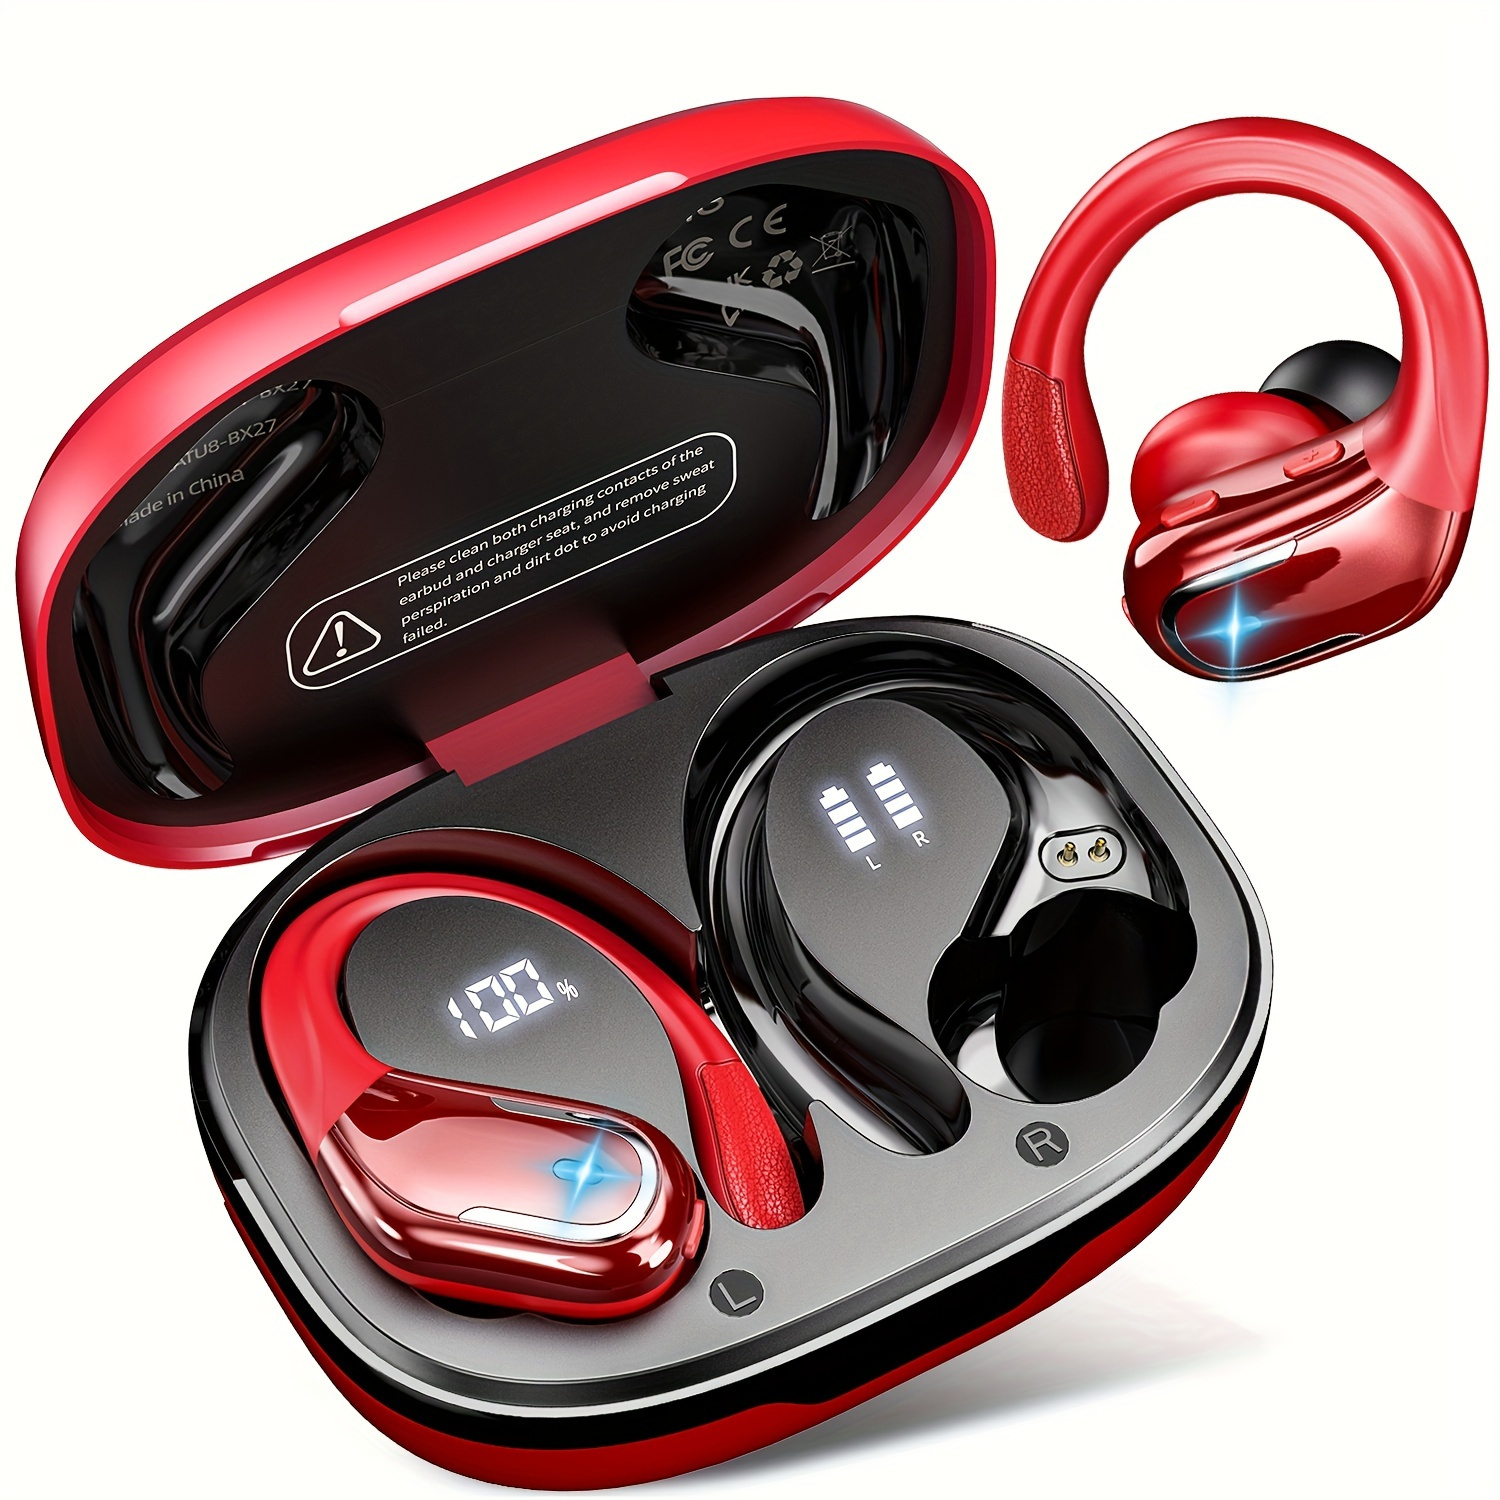 

New Wireless Earbuds For Running Sports, Wireless Earphones With Earhooks Pure Bass Sound, Over Ear Headphones With Dual-led Display, Earphones Built-in Microphone, Noise Cancelling Headset (red)